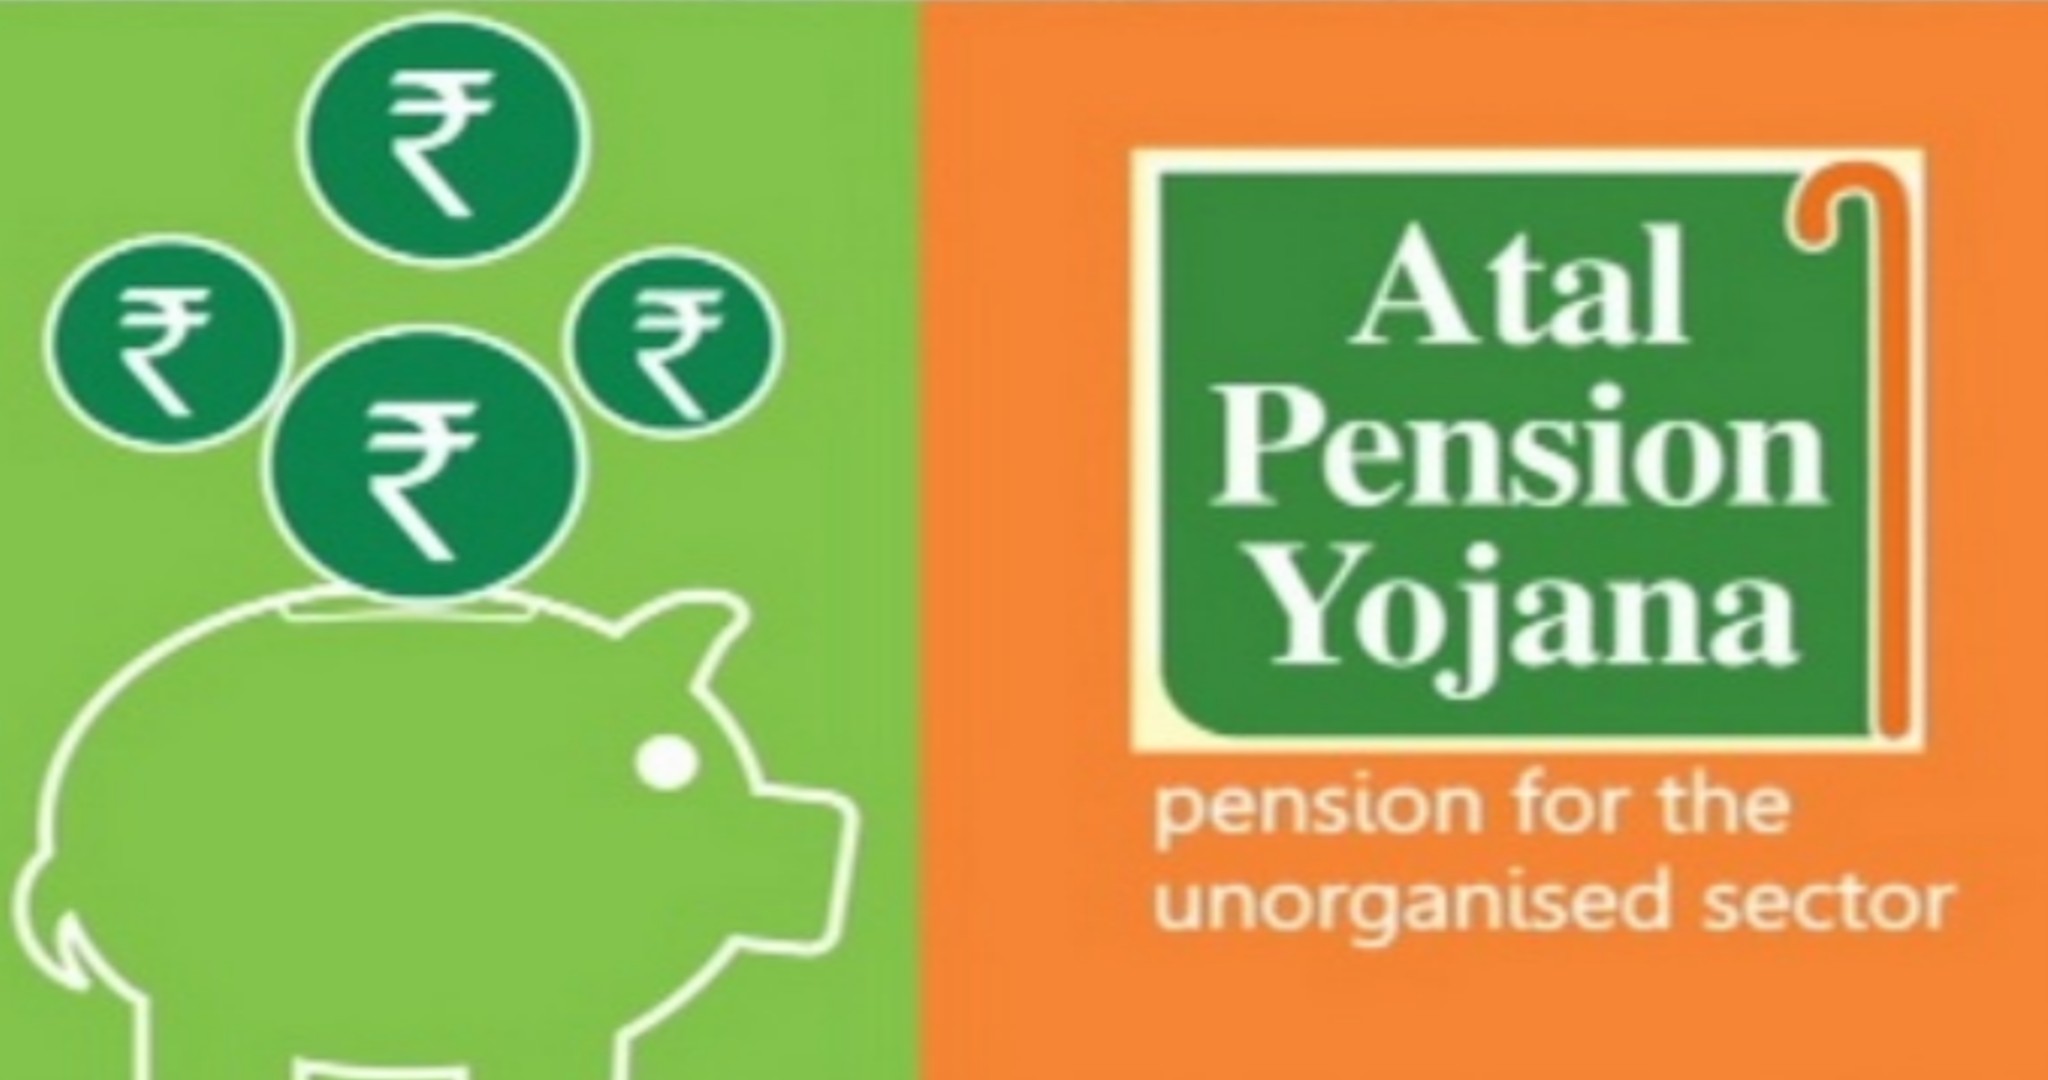 10 Lesser Known Facts Of Atal Pension Yojana